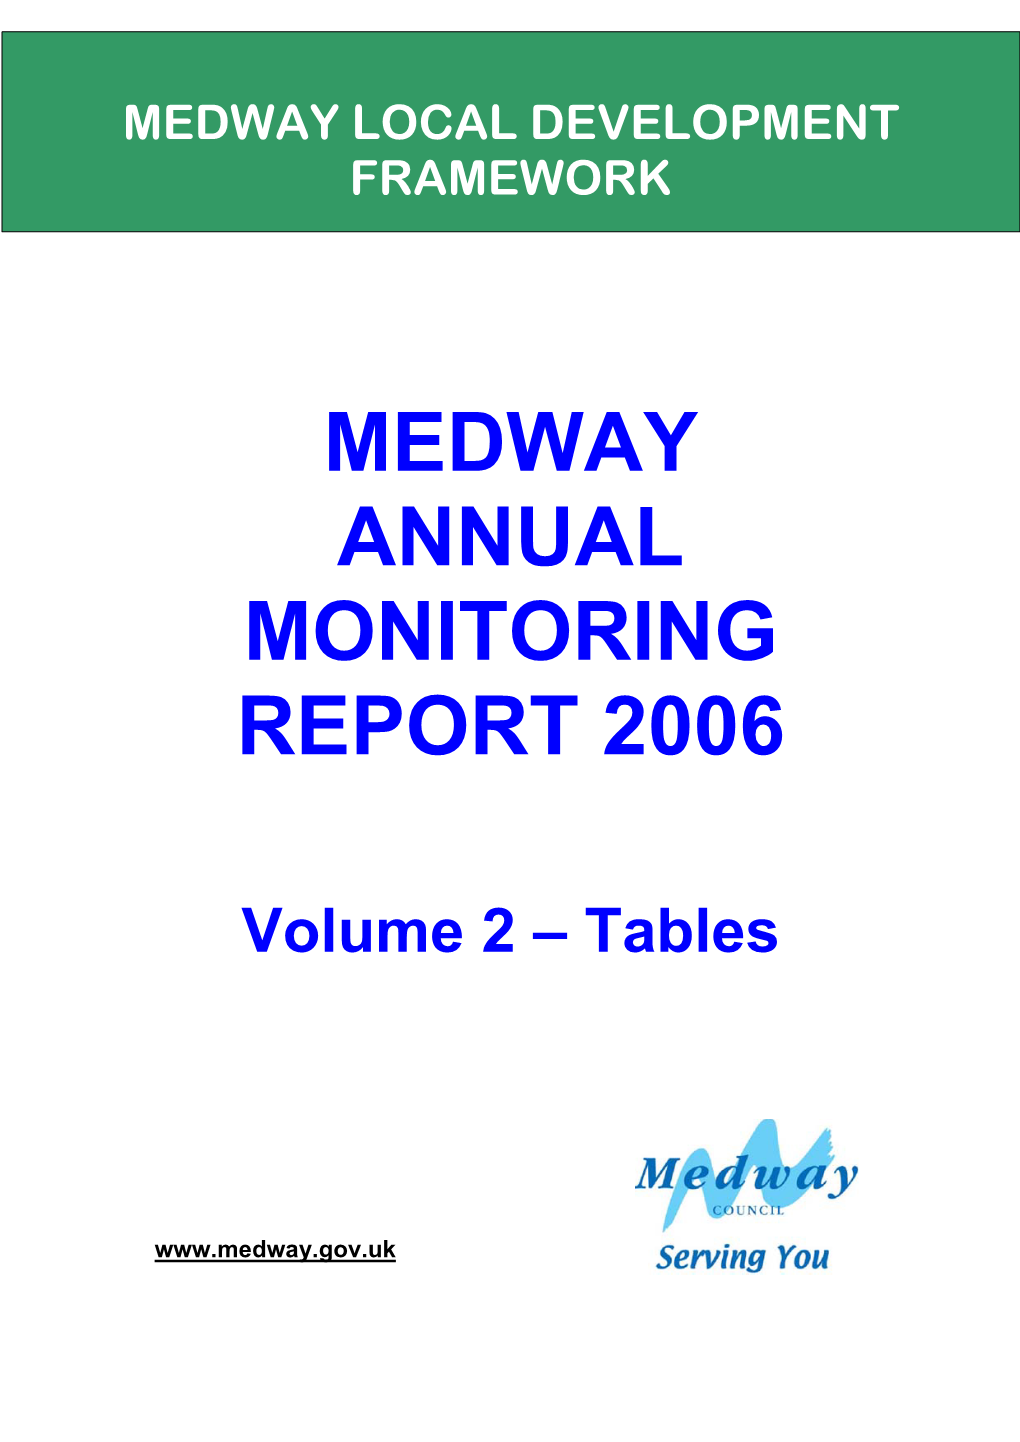 Medway Annual Monitoring Report 2006